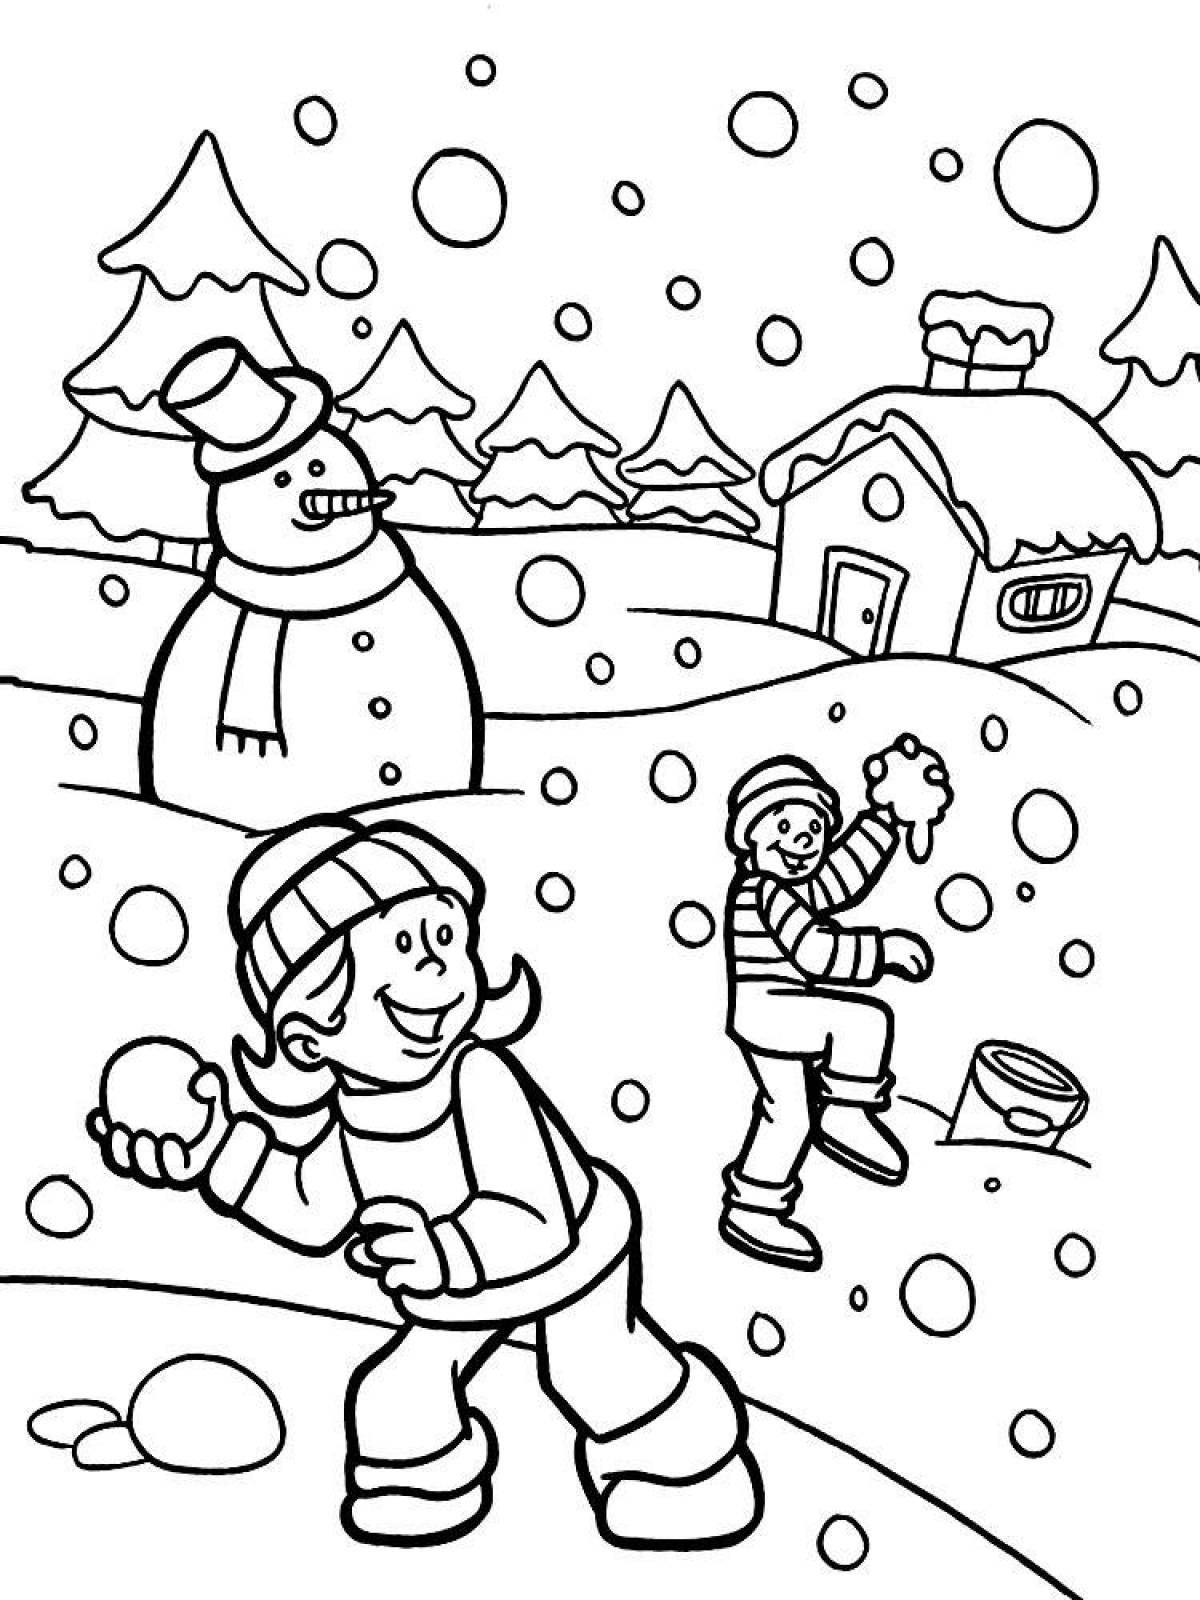 Bright coloring book for children winter fun 5-6 years old